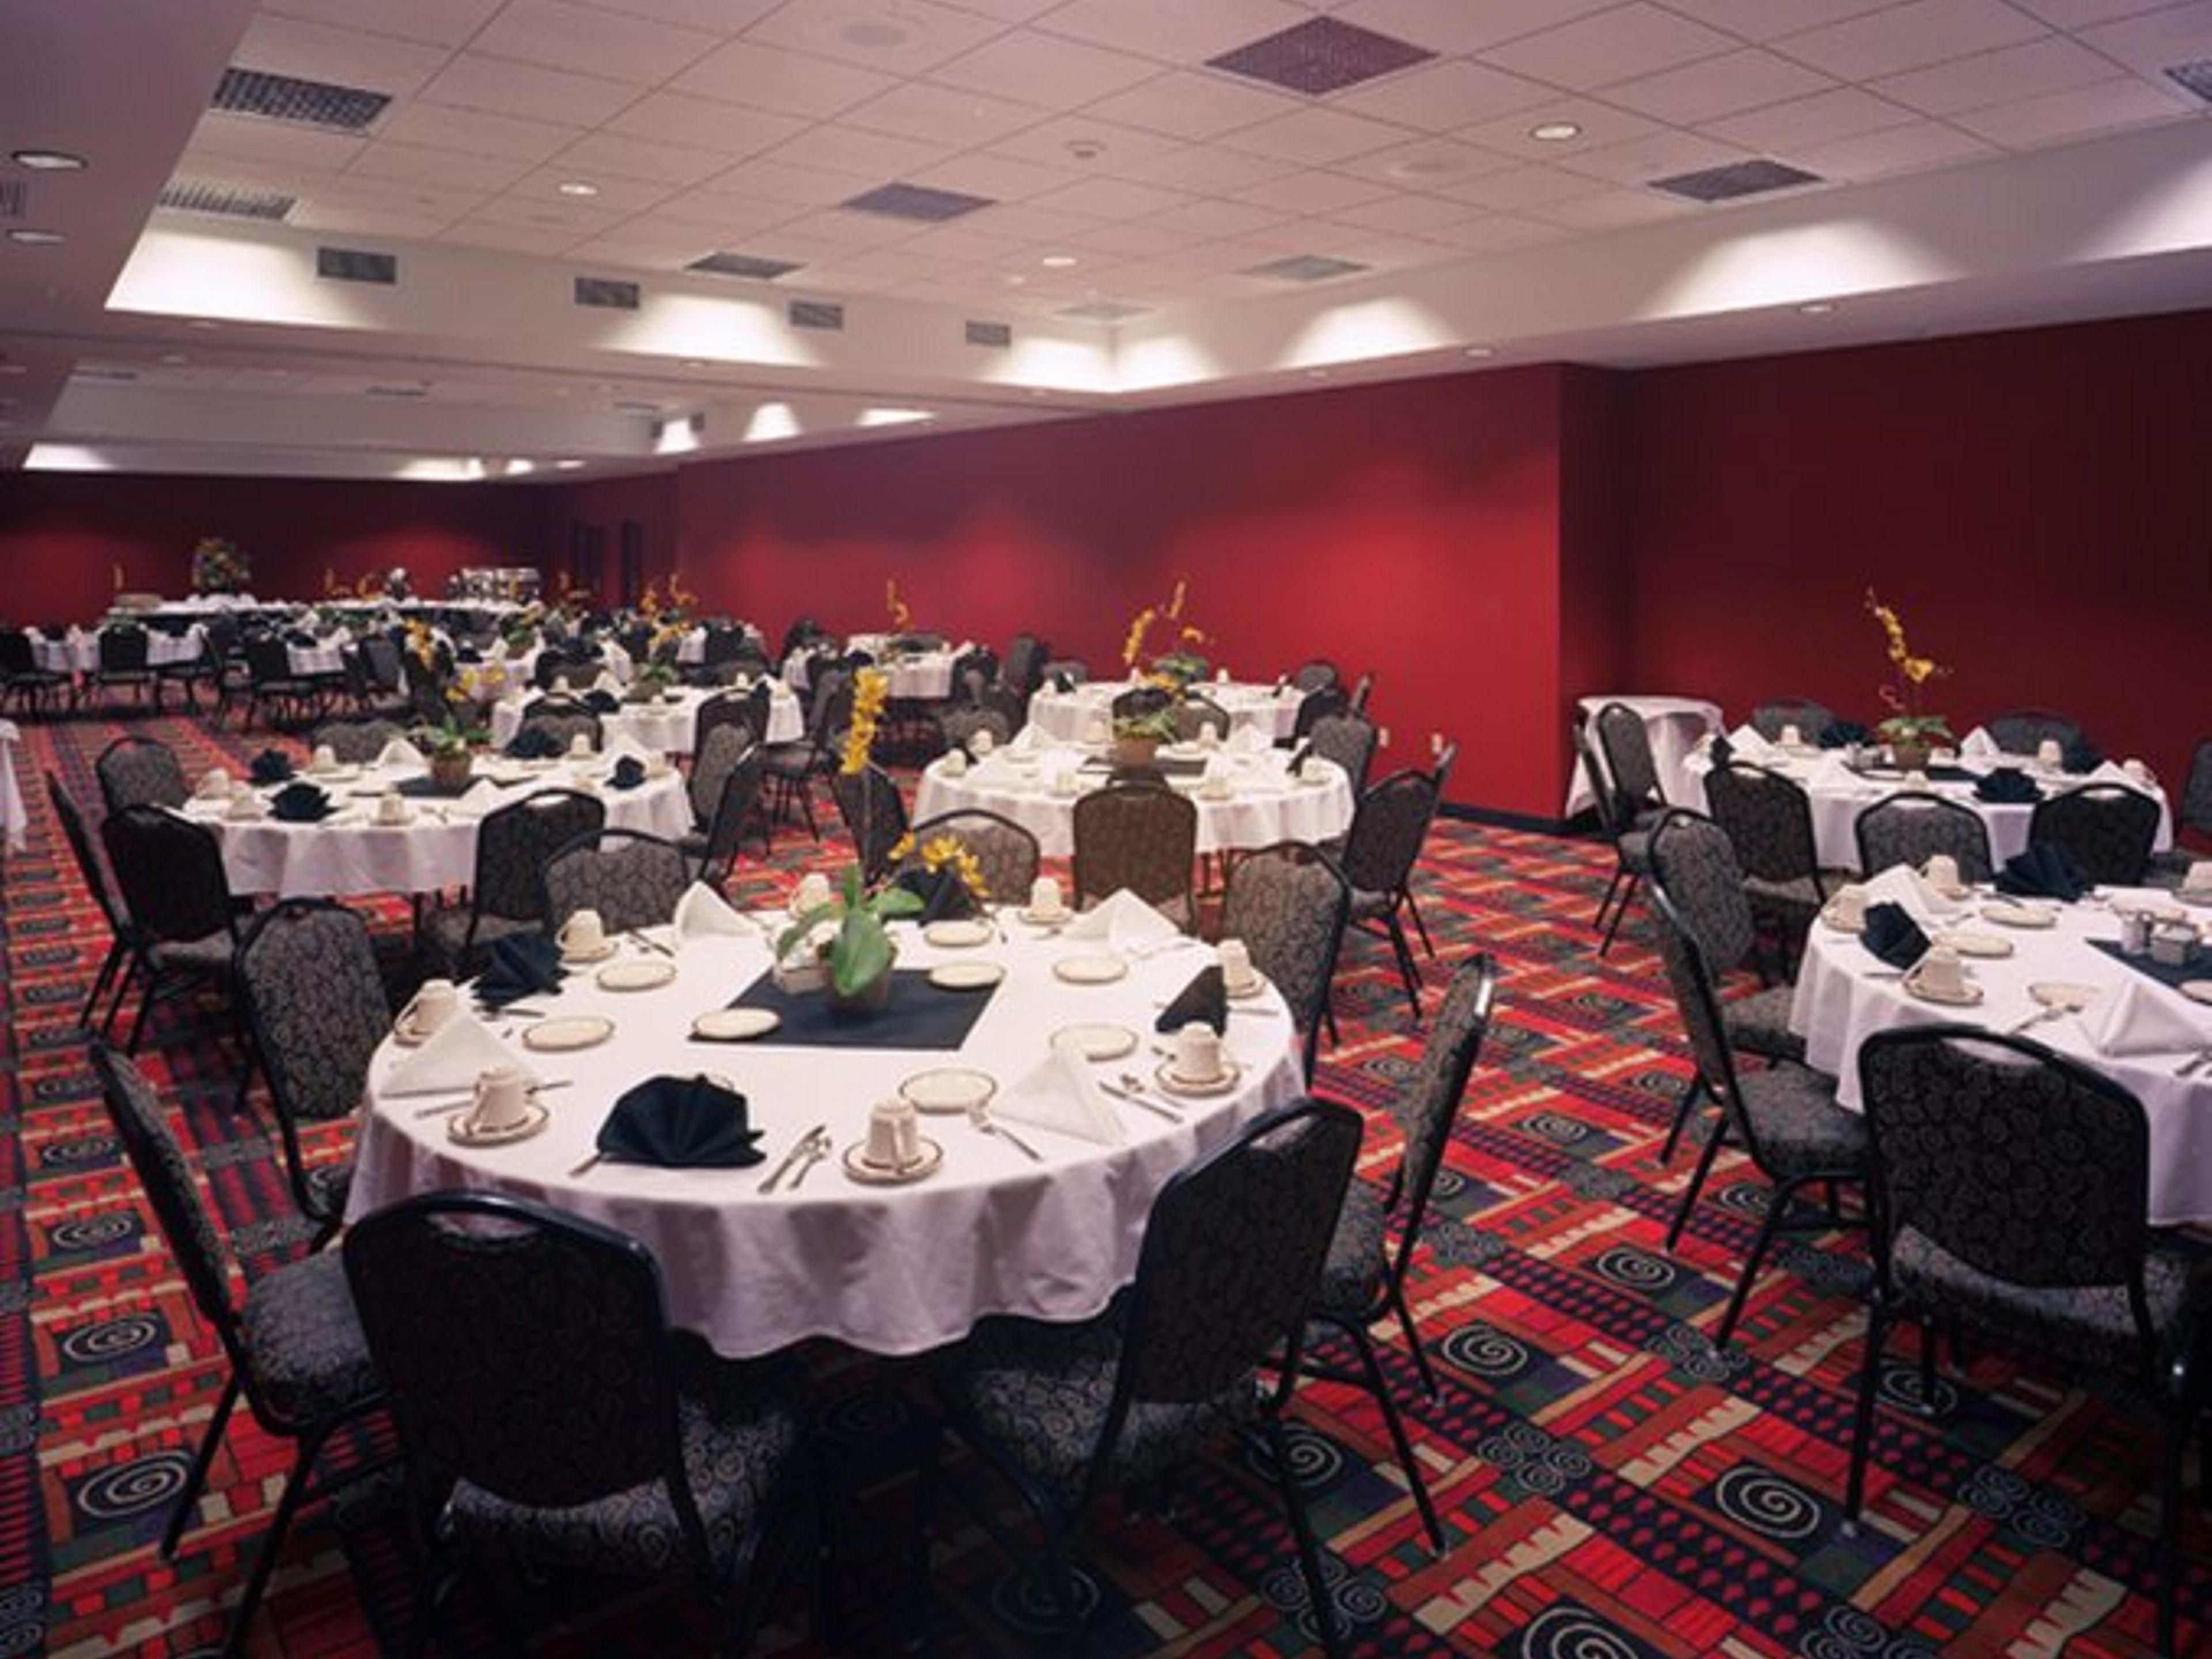 With over 3,000 square feet of meeting space our hotel is the perfect place to host your next corporate event or wedding!